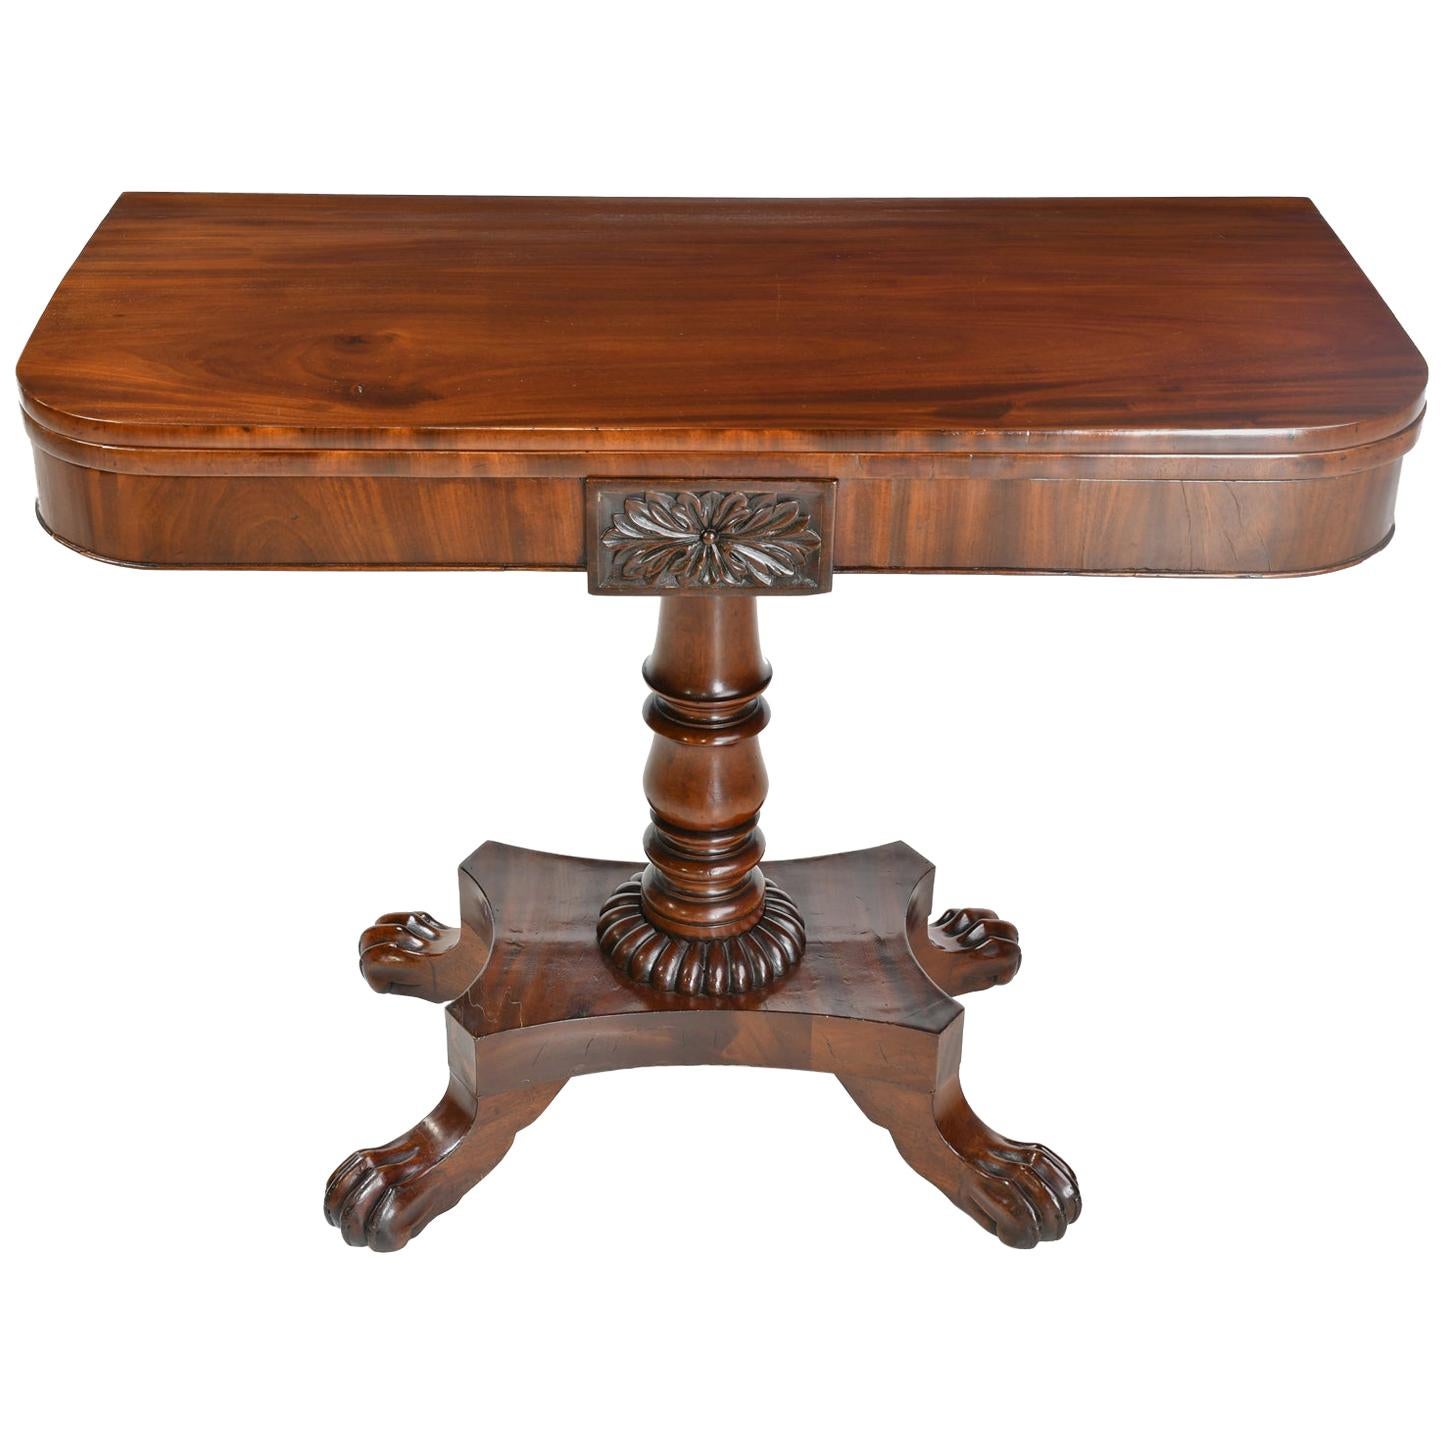 Antique American Empire Game/Card Table in West Indies Mahogany, circa 1830 For Sale